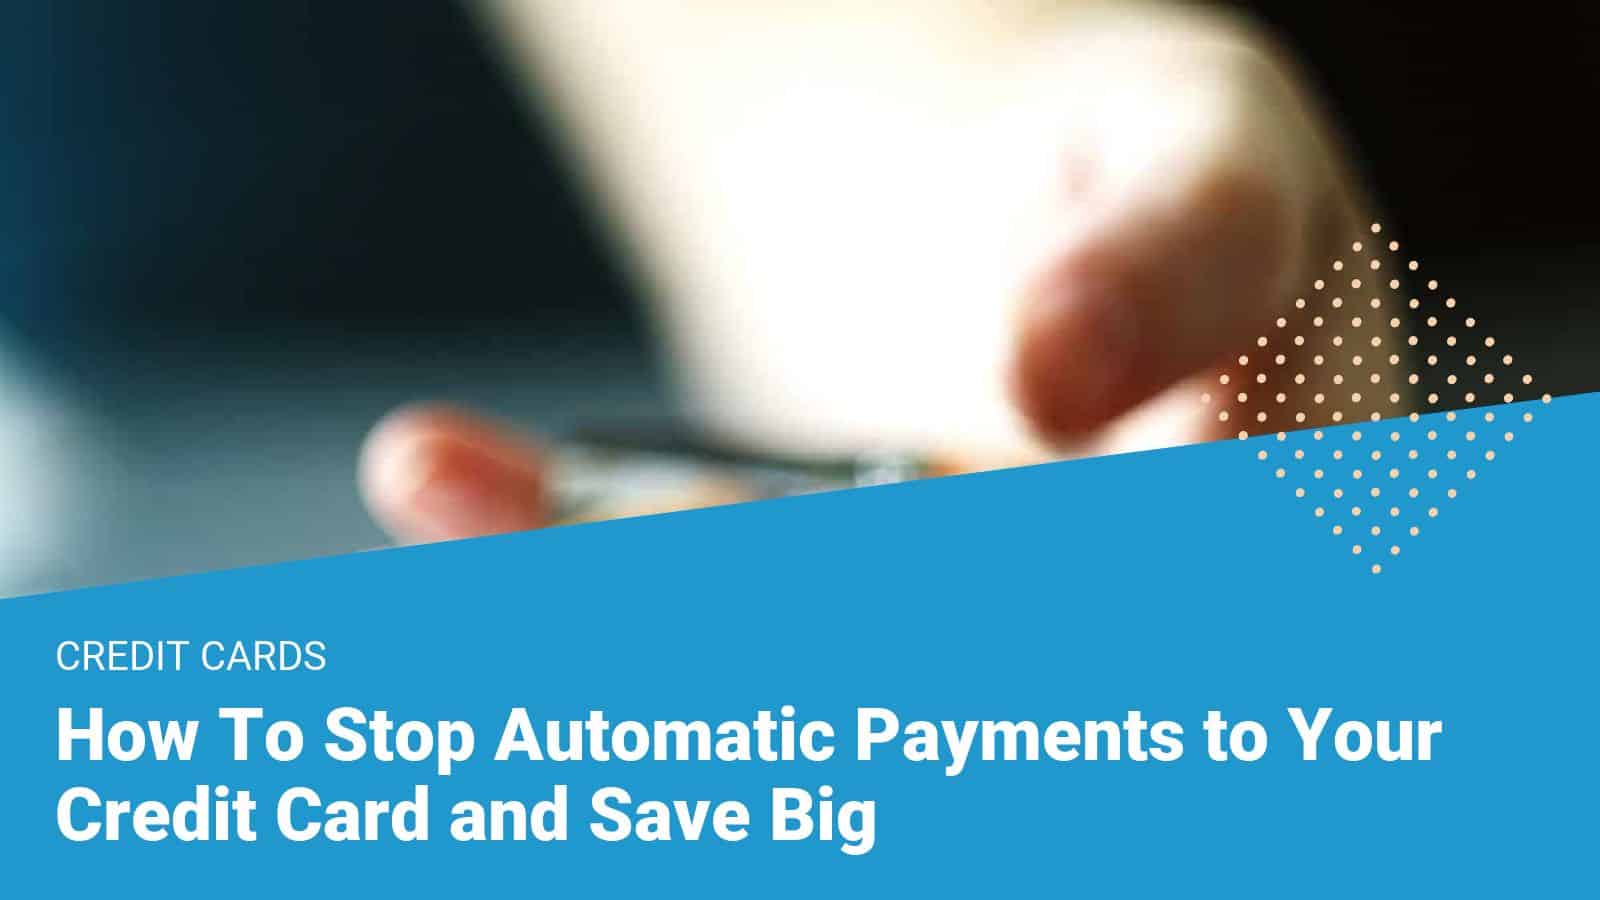 How To Stop Automatic Payments To Your Credit Card And Save Big